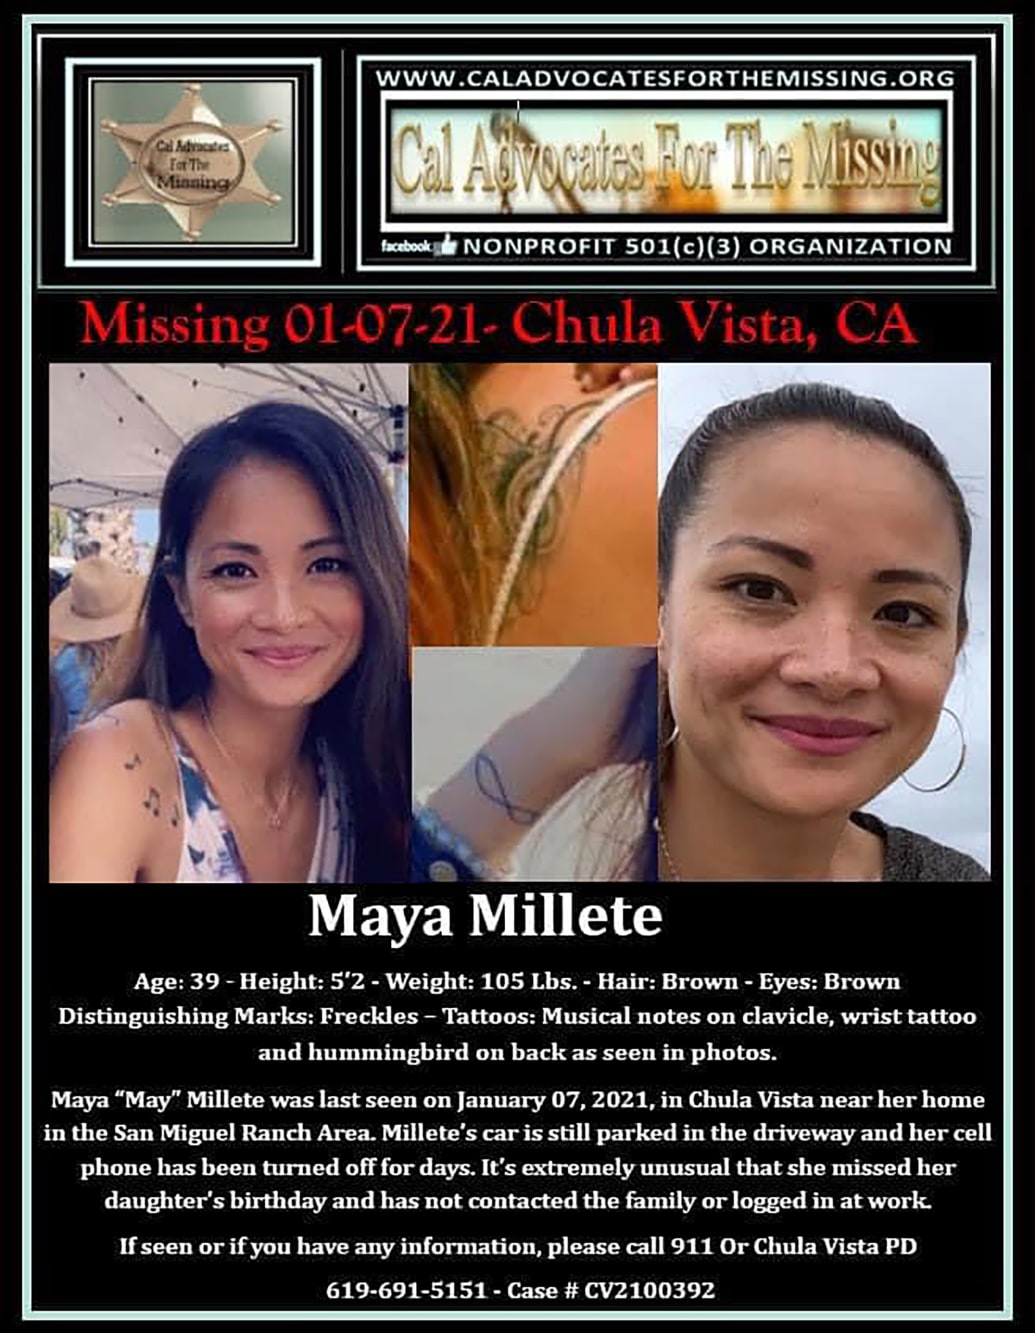 California Mom Maya Millete Vanished 2 Months Ago Her Husband Larry Has Stopped Cooperating